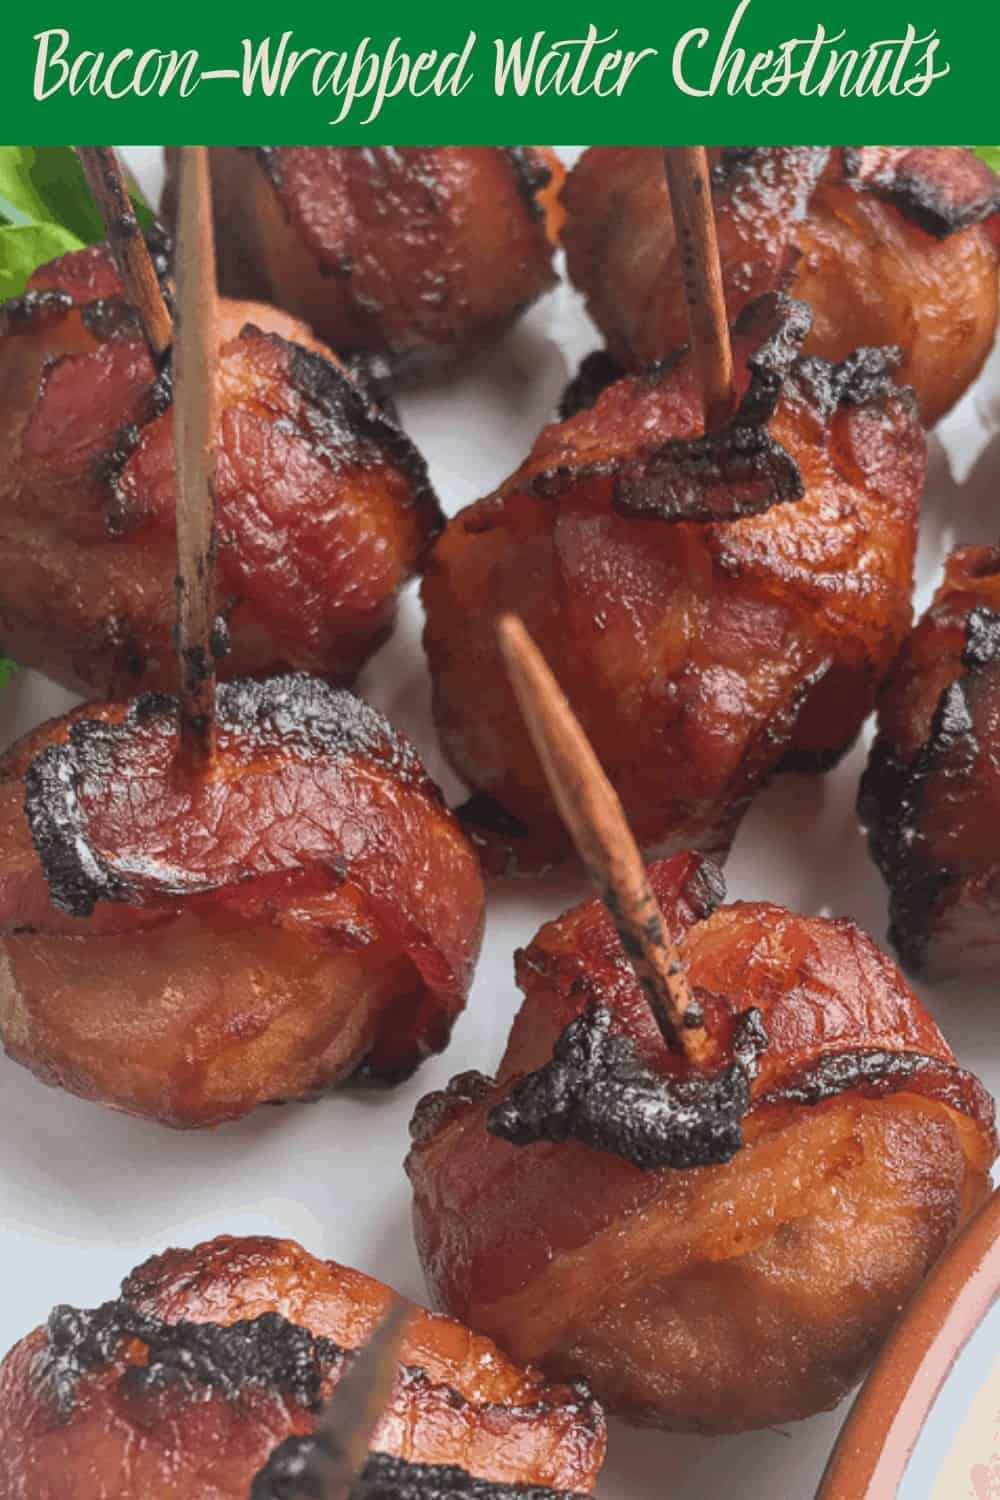 Bacon-wrapped water chestnuts - football food snacks 